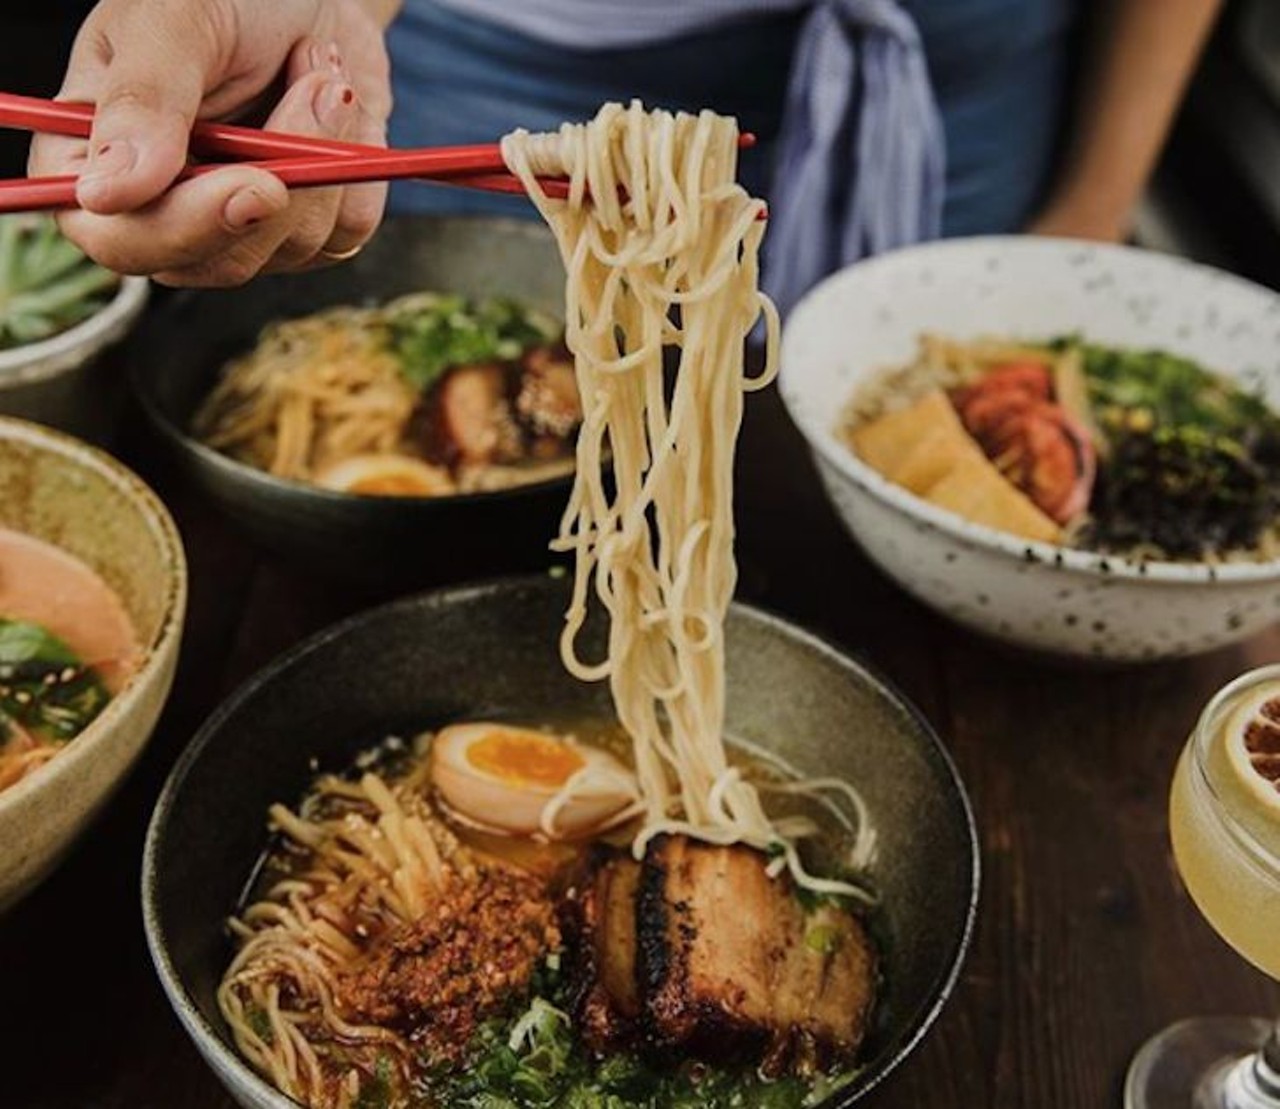 Domu
East End Market, 3201 Corrine Dr. Suite 100, (407) 960-1228
Popular ramen joint lives up to the hype offering near-perfect bowls of tonkotsu, shoyu, miso and curry ramen. There&#146;s an uni pasta for those who want to forgo broth for the richness of sea urchin, but don&#146;t overlook other soupless options like the crackling good Korean fried chicken with butter sauce and the grilled octopus. Cocktails are taken seriously here.
Photo via domufl/Instagram